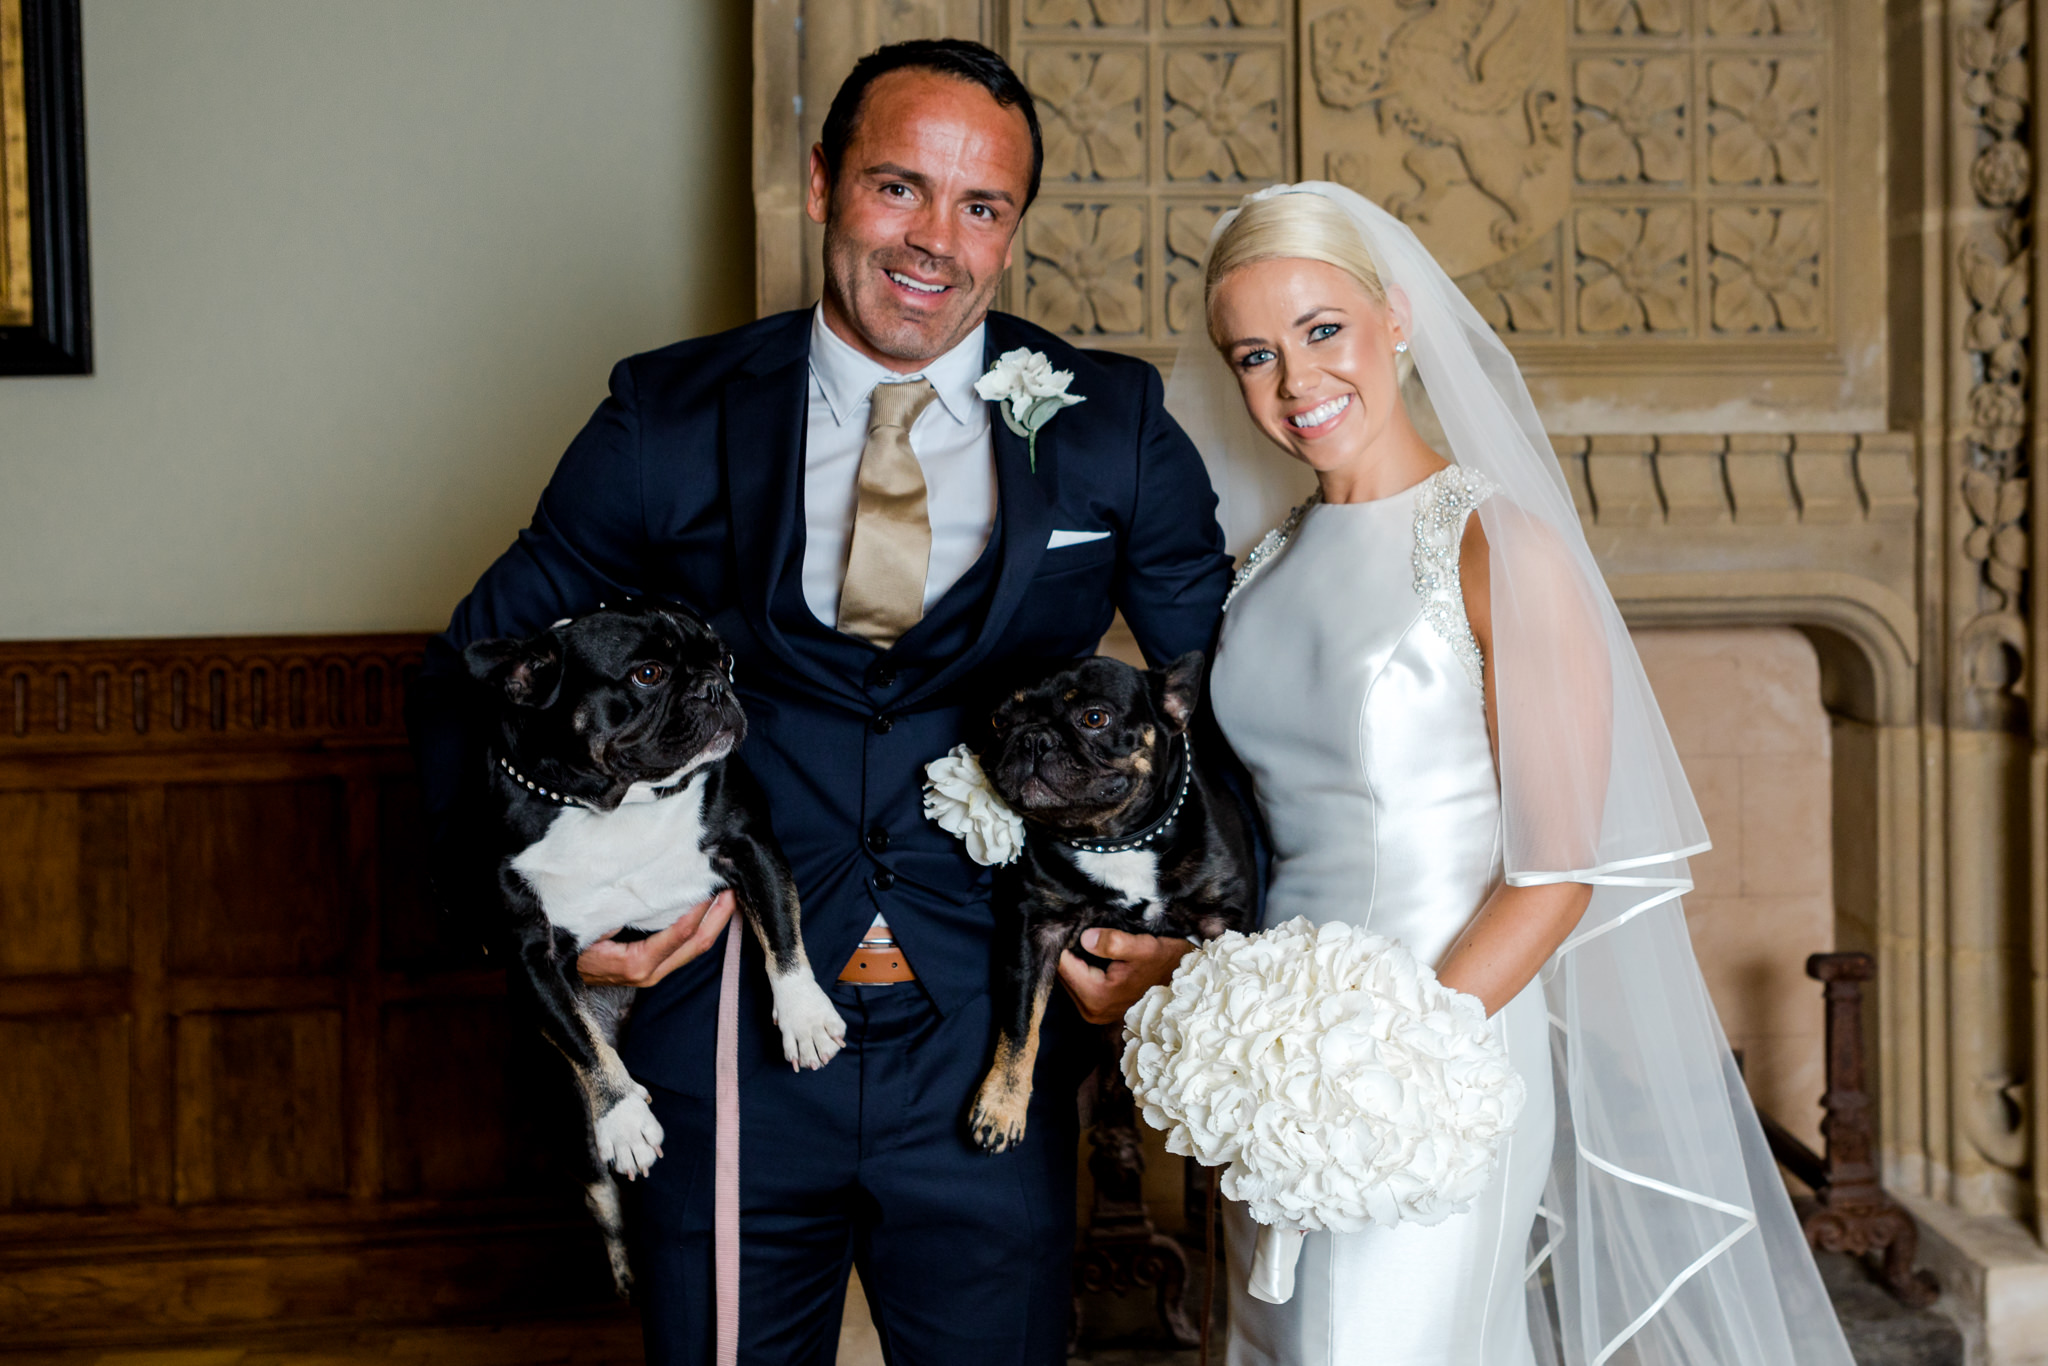 Dogs at weddings - With the Bride and Groom and Miskin Manor